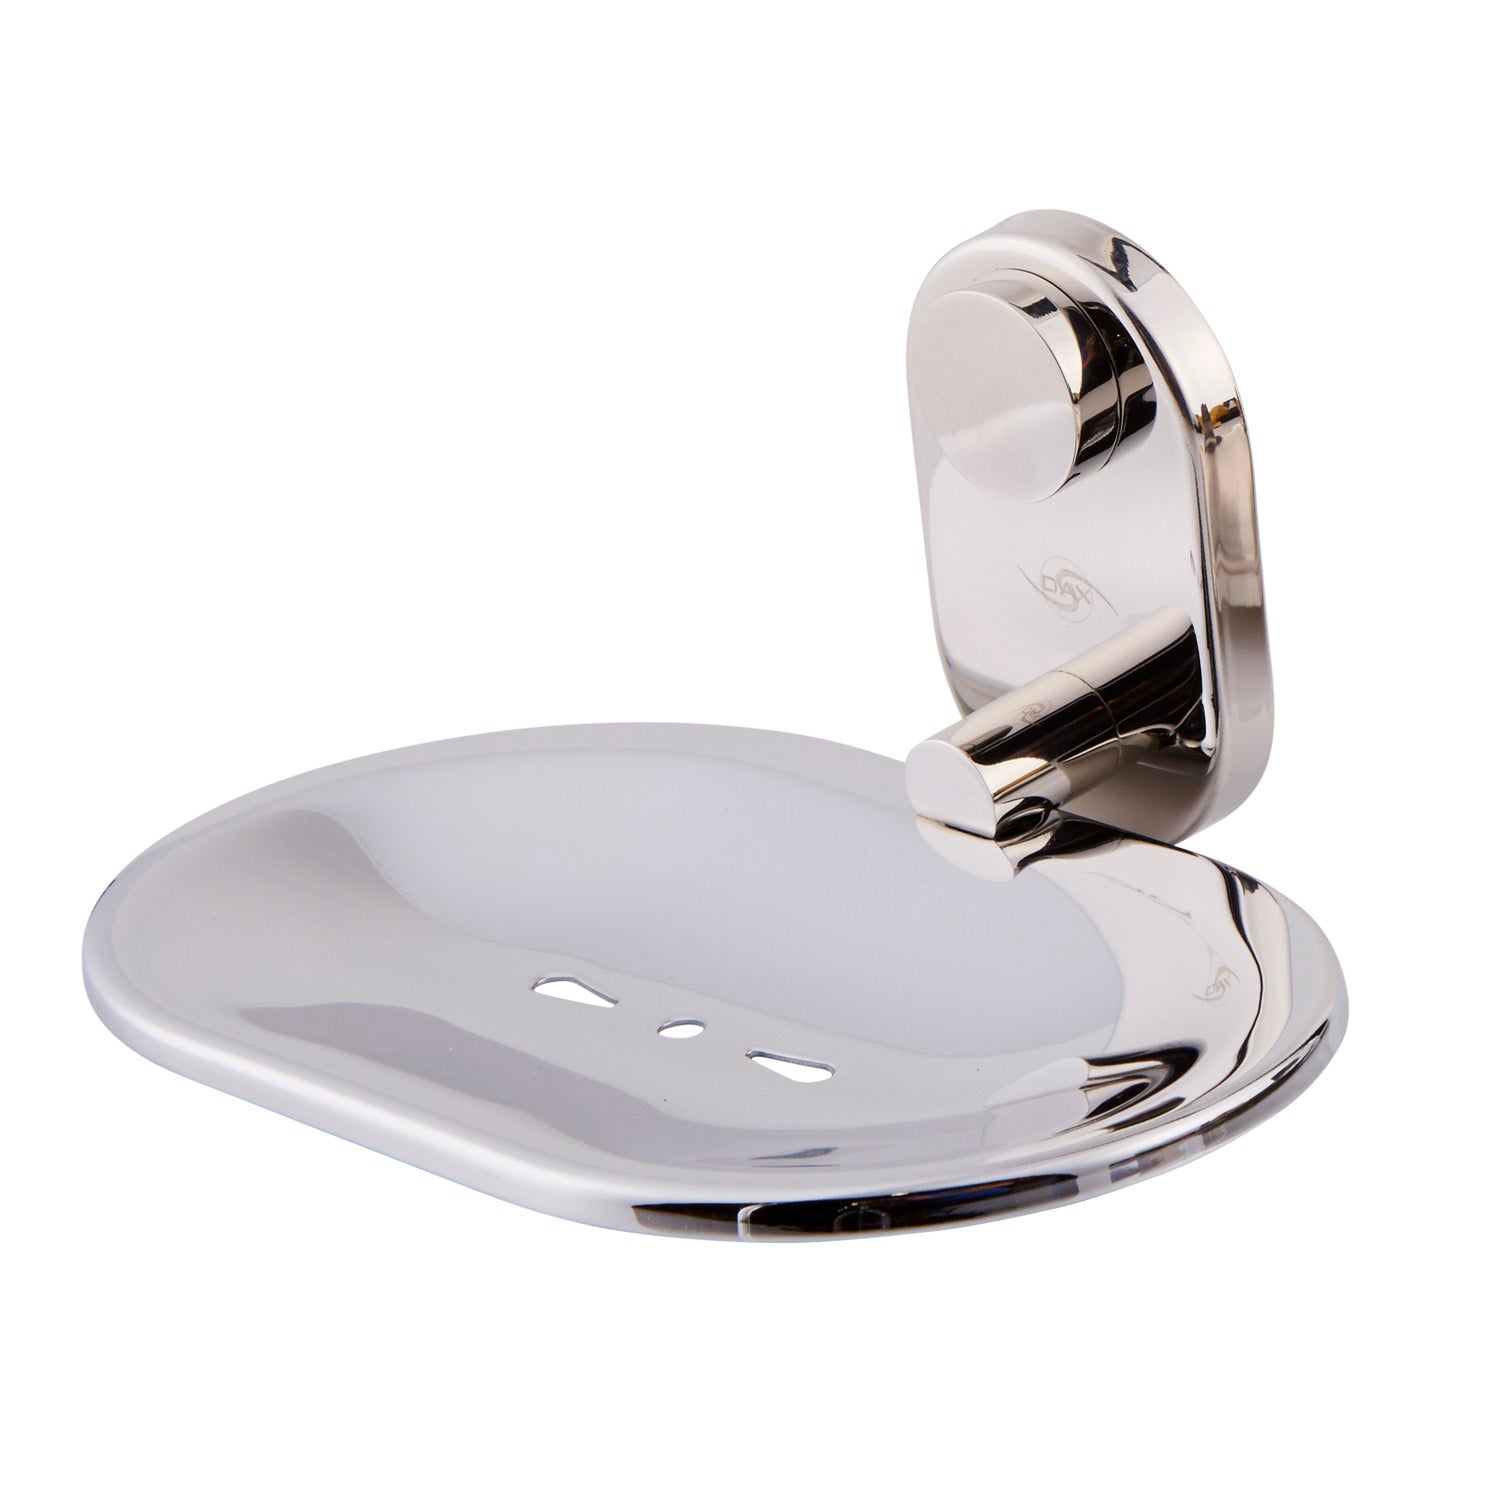 DAX Stainless Steel Soap Dish, Wall Mount Tray, Satin Finish, 4-5/8 x 2-3/4 x 5-15/16  Inches (DAX-G0205A-S)